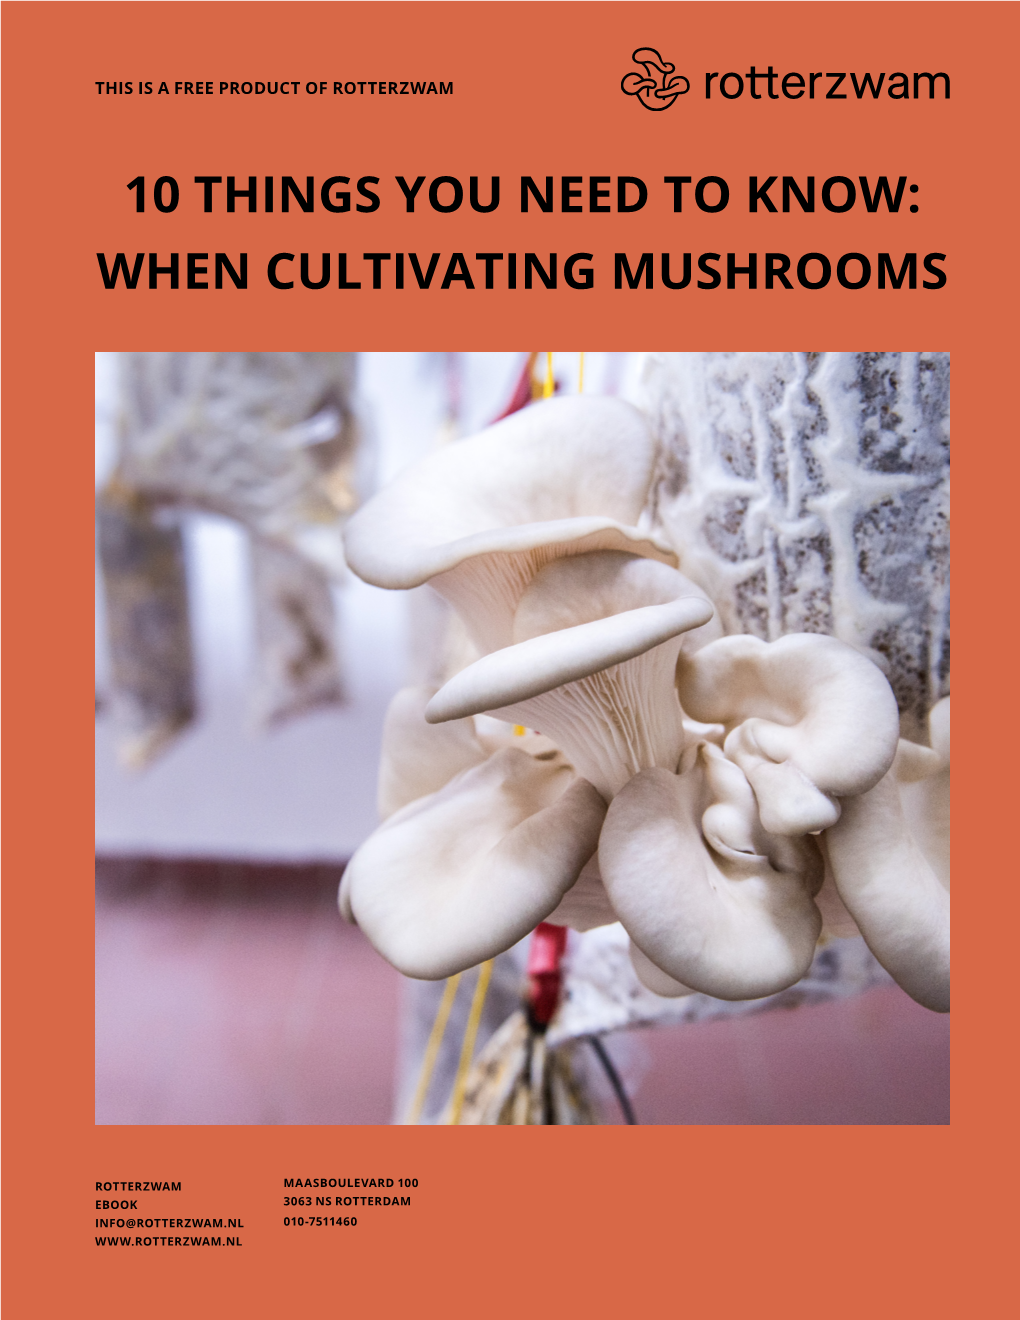 10 Things You Need to Know: When Cultivating Mushrooms